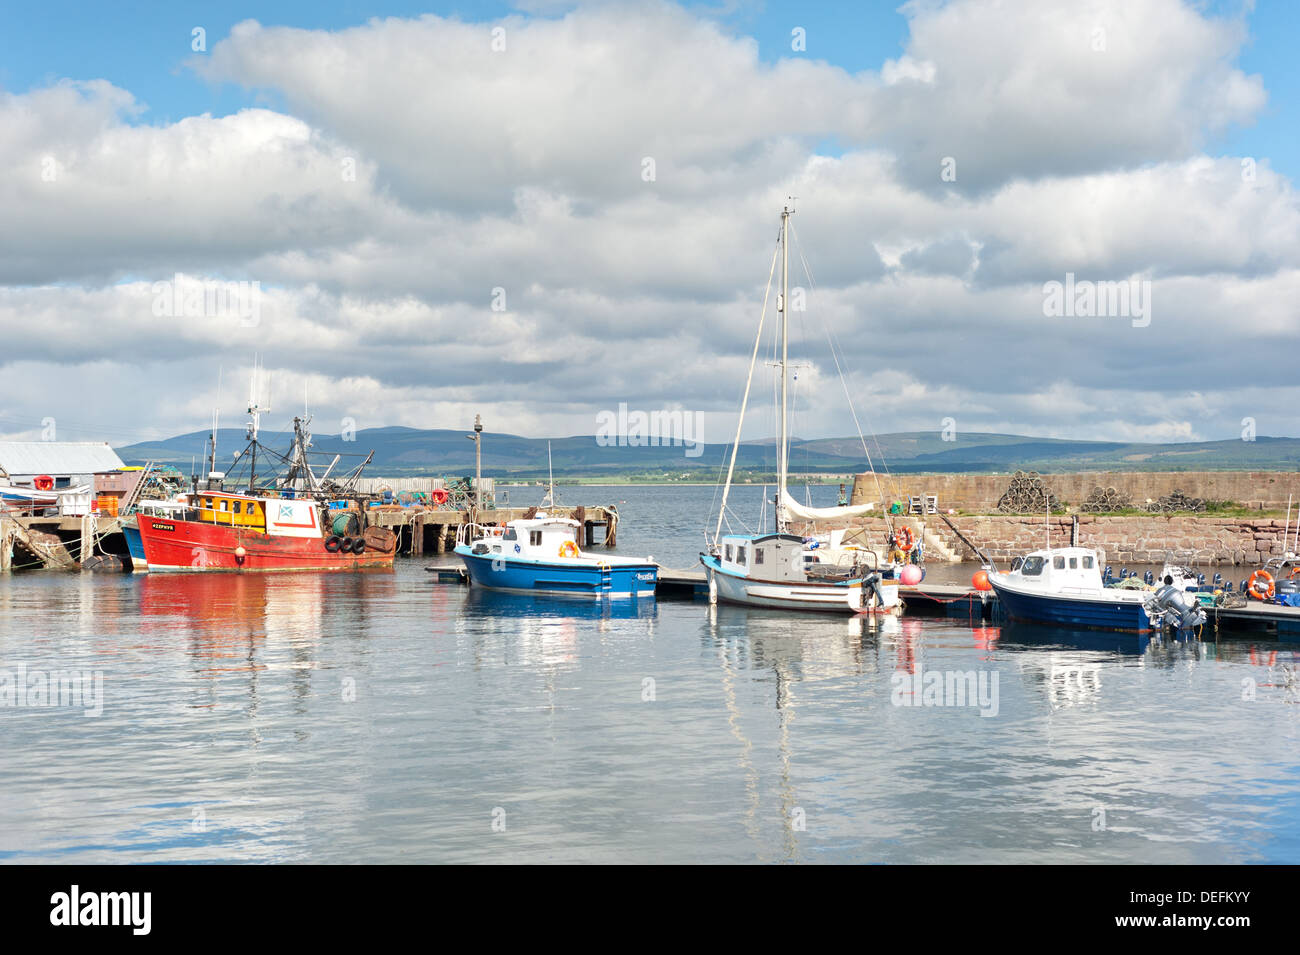 Boats in the Harbour at Cromarty, Scotland. Stock Photo